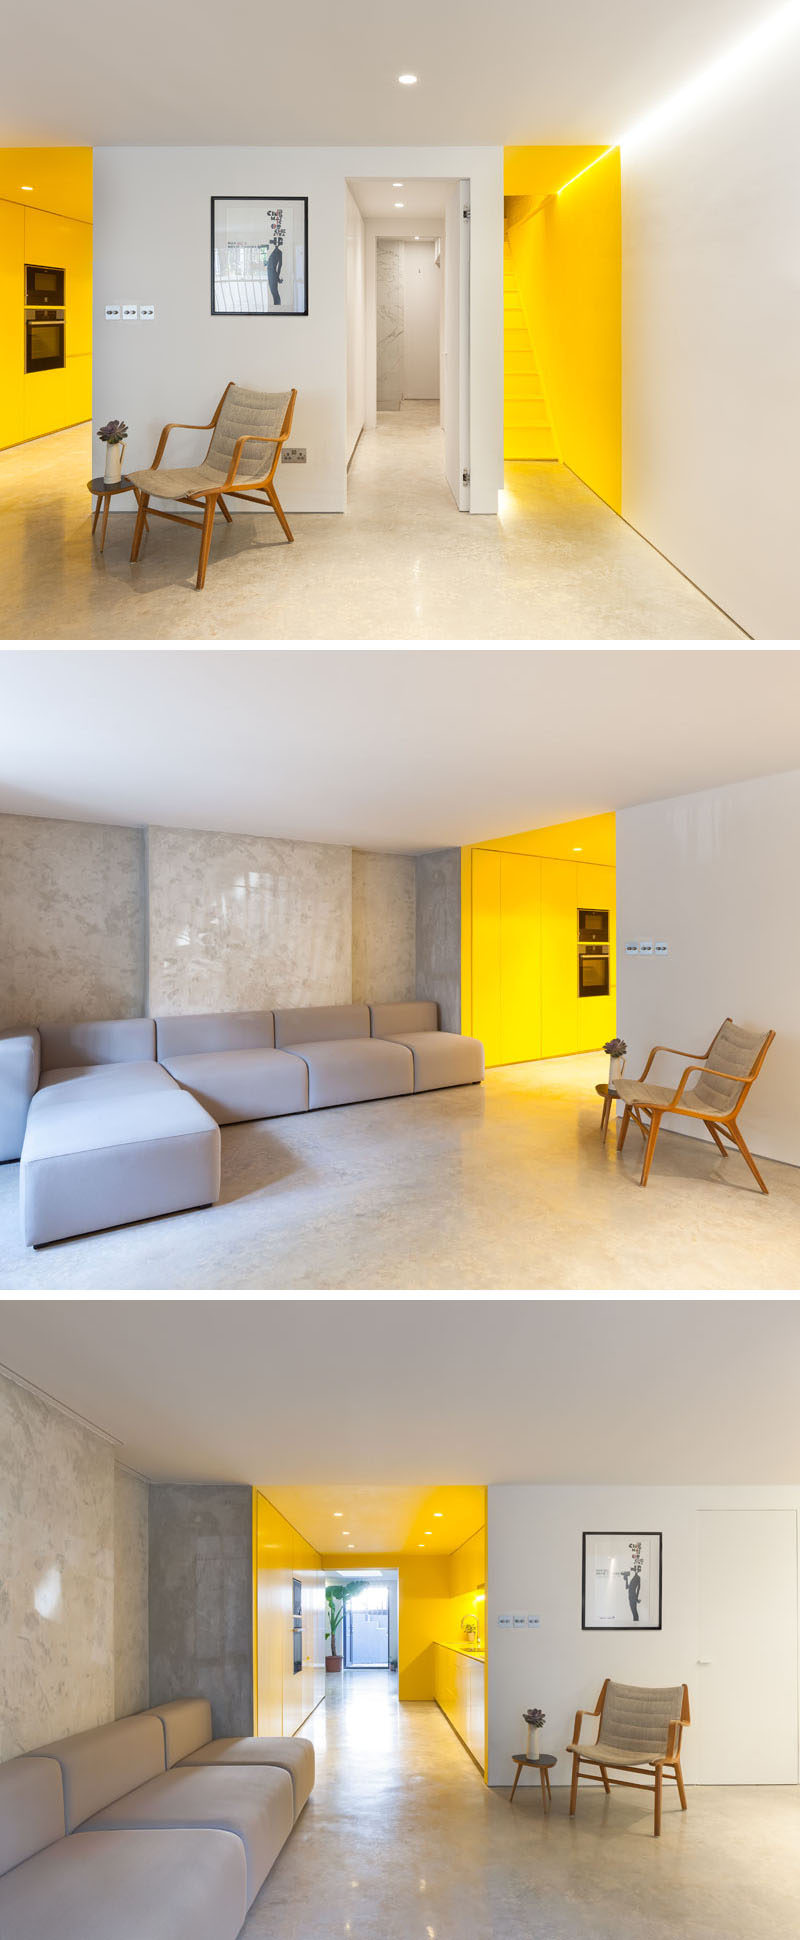 At the bottom of the yellow stairs is a living room that's bright white. A soft grey couch complements the polished, light-toned concrete that's been used for the floor. Off to the side is the entrance to a bold yellow kitchen. #Couch #Yellow #YellowStairs #YellowKitchen